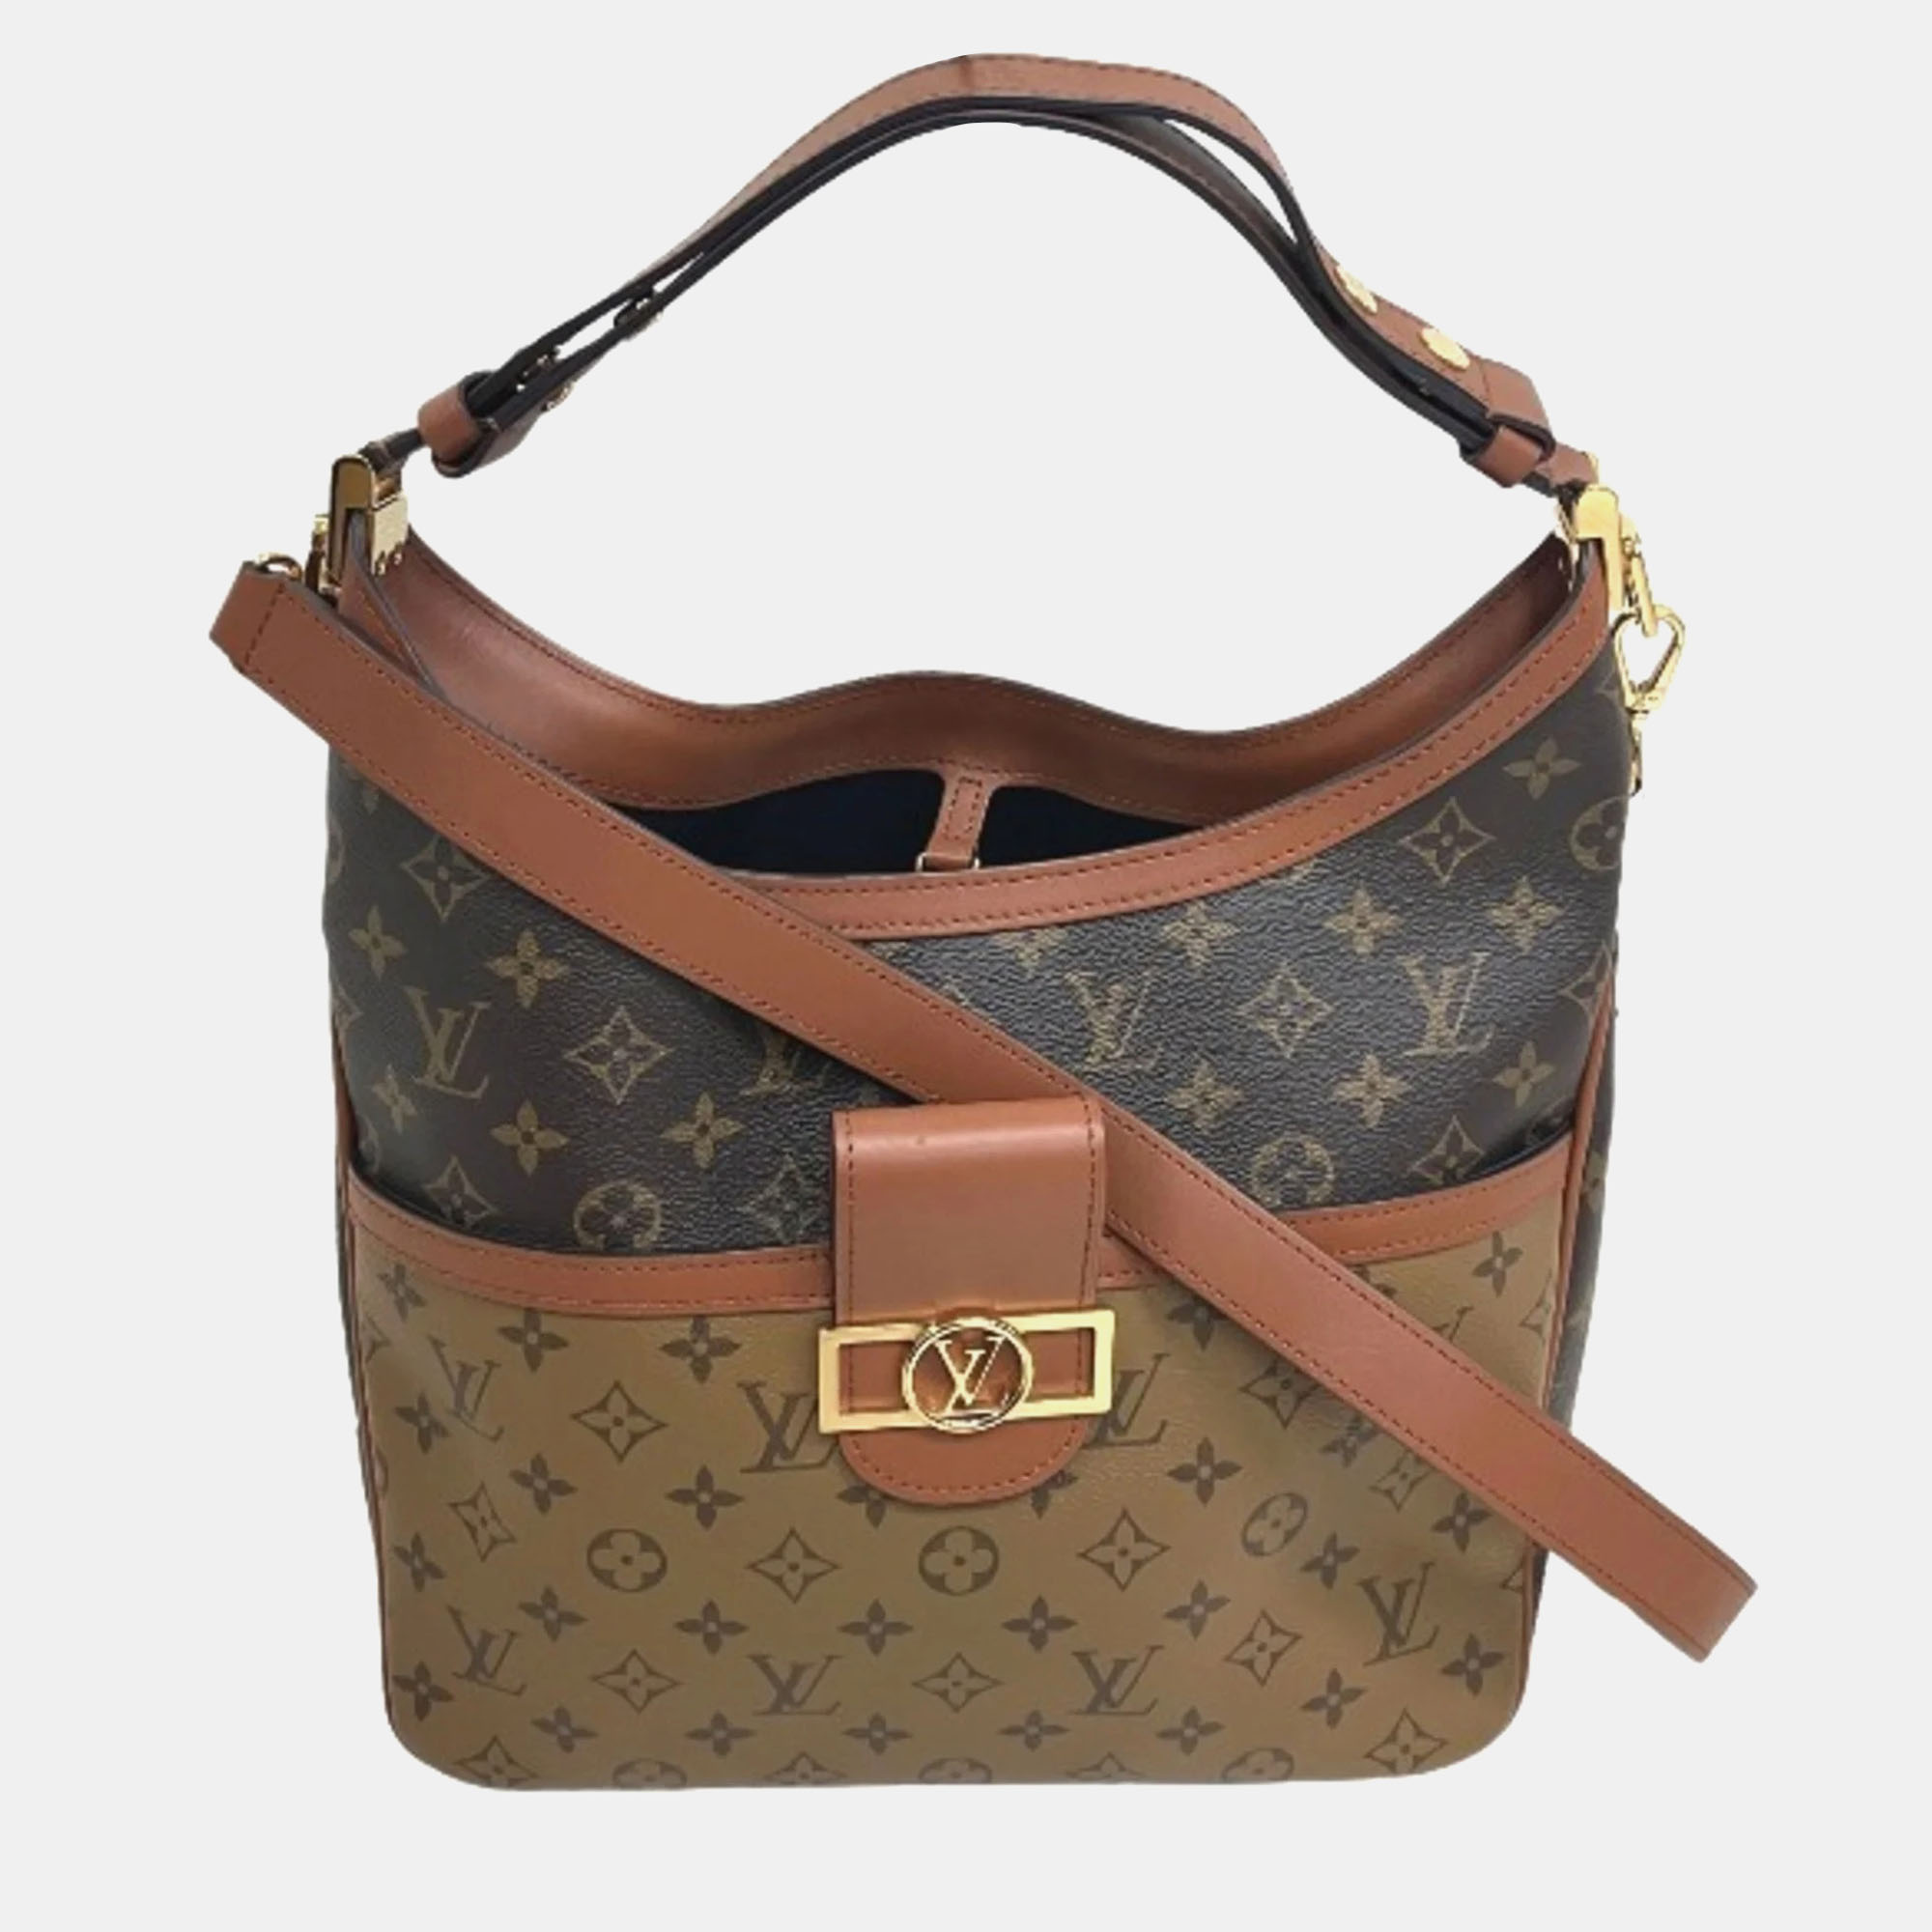 Experience luxury with this Louis Vuitton bag. Meticulously crafted with the best materials its a timeless piece that will elevate any outfit.